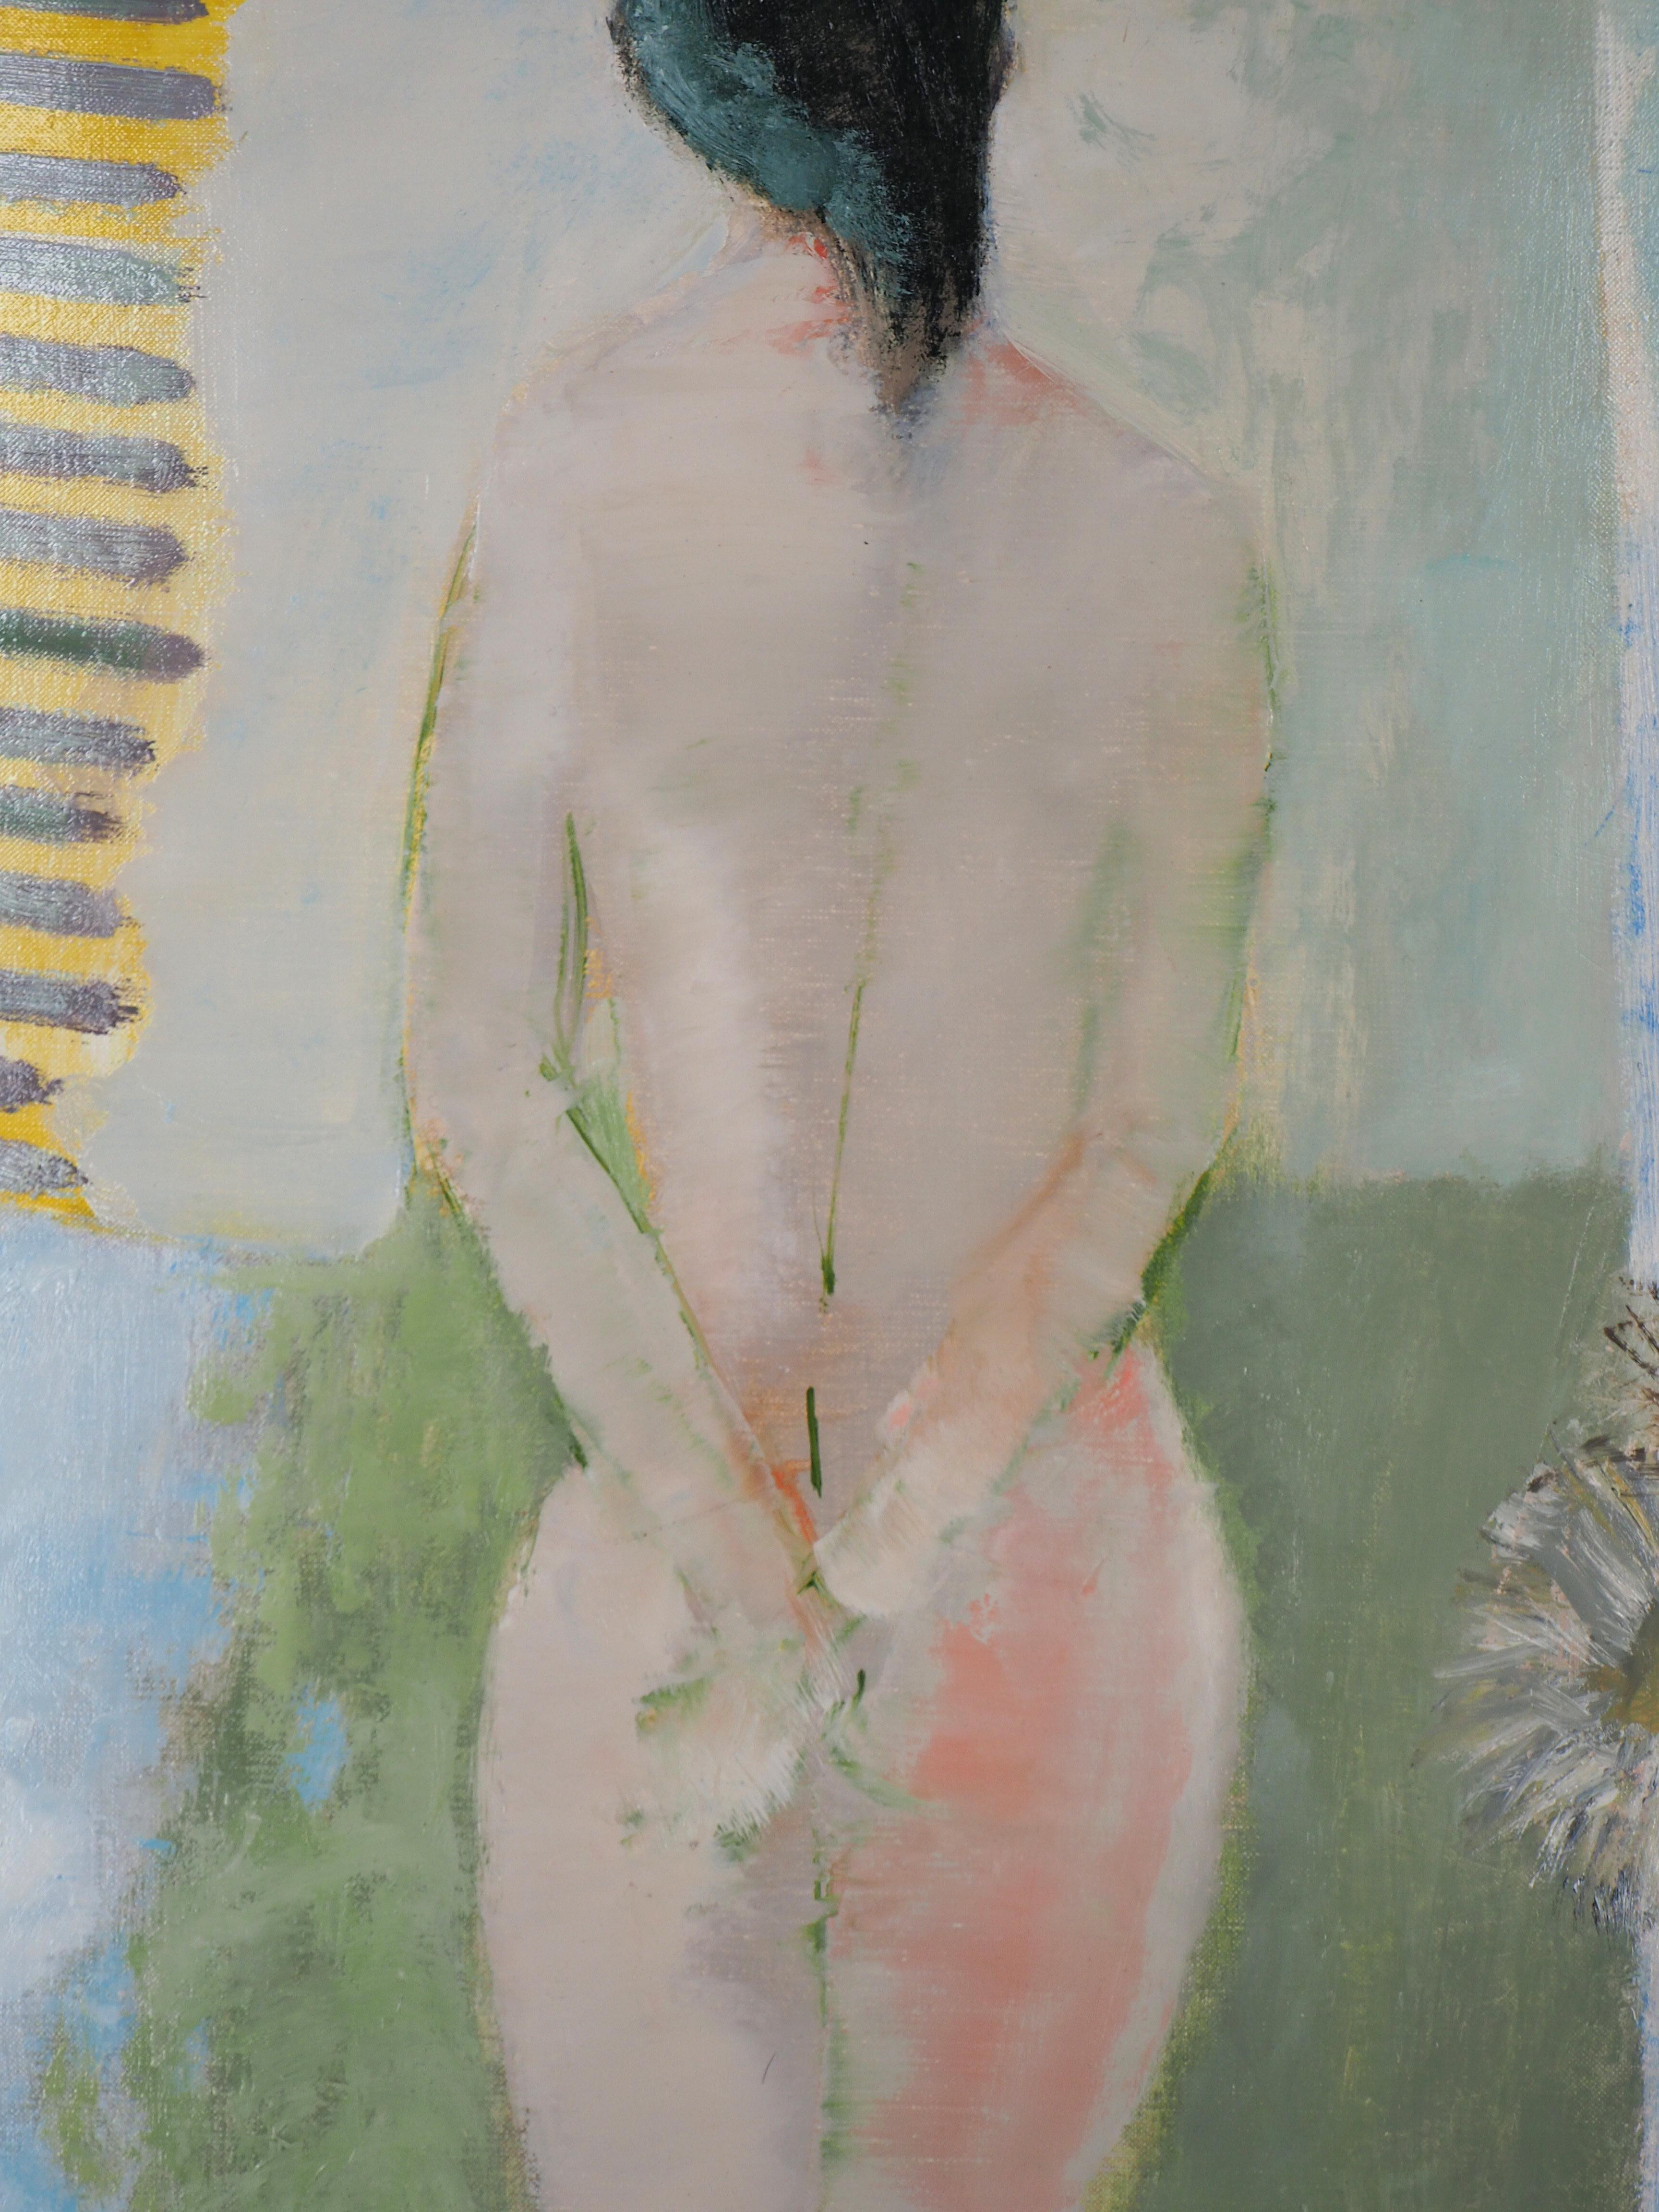 Interior : Model with Thistles - Original Oil on Canvas, Handsigned - Gray Nude Painting by Guy Bardone